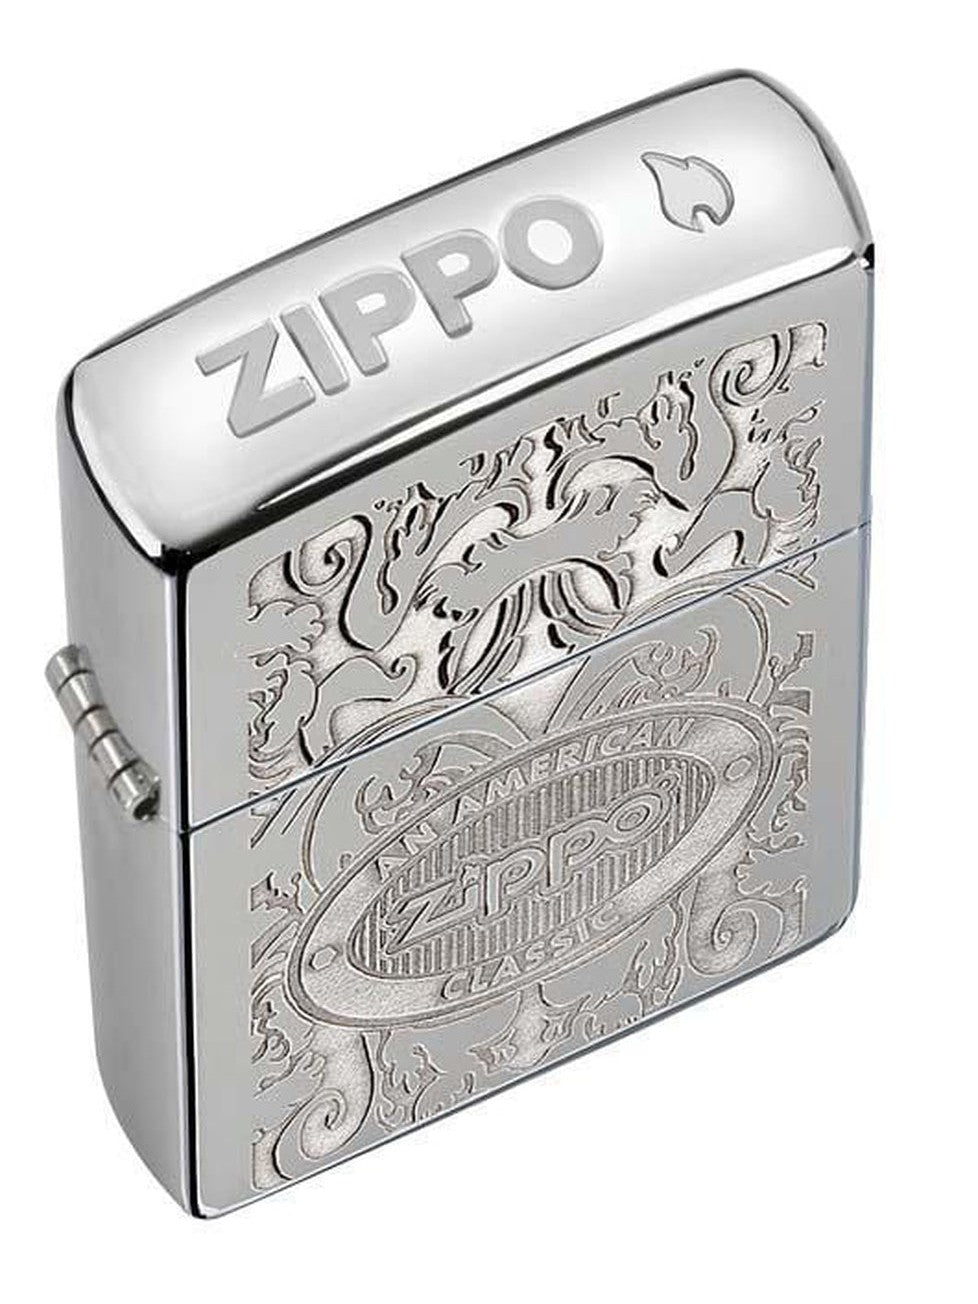 Zippo Pipe Lighter: American Classic, Crown Stamp - High Polish